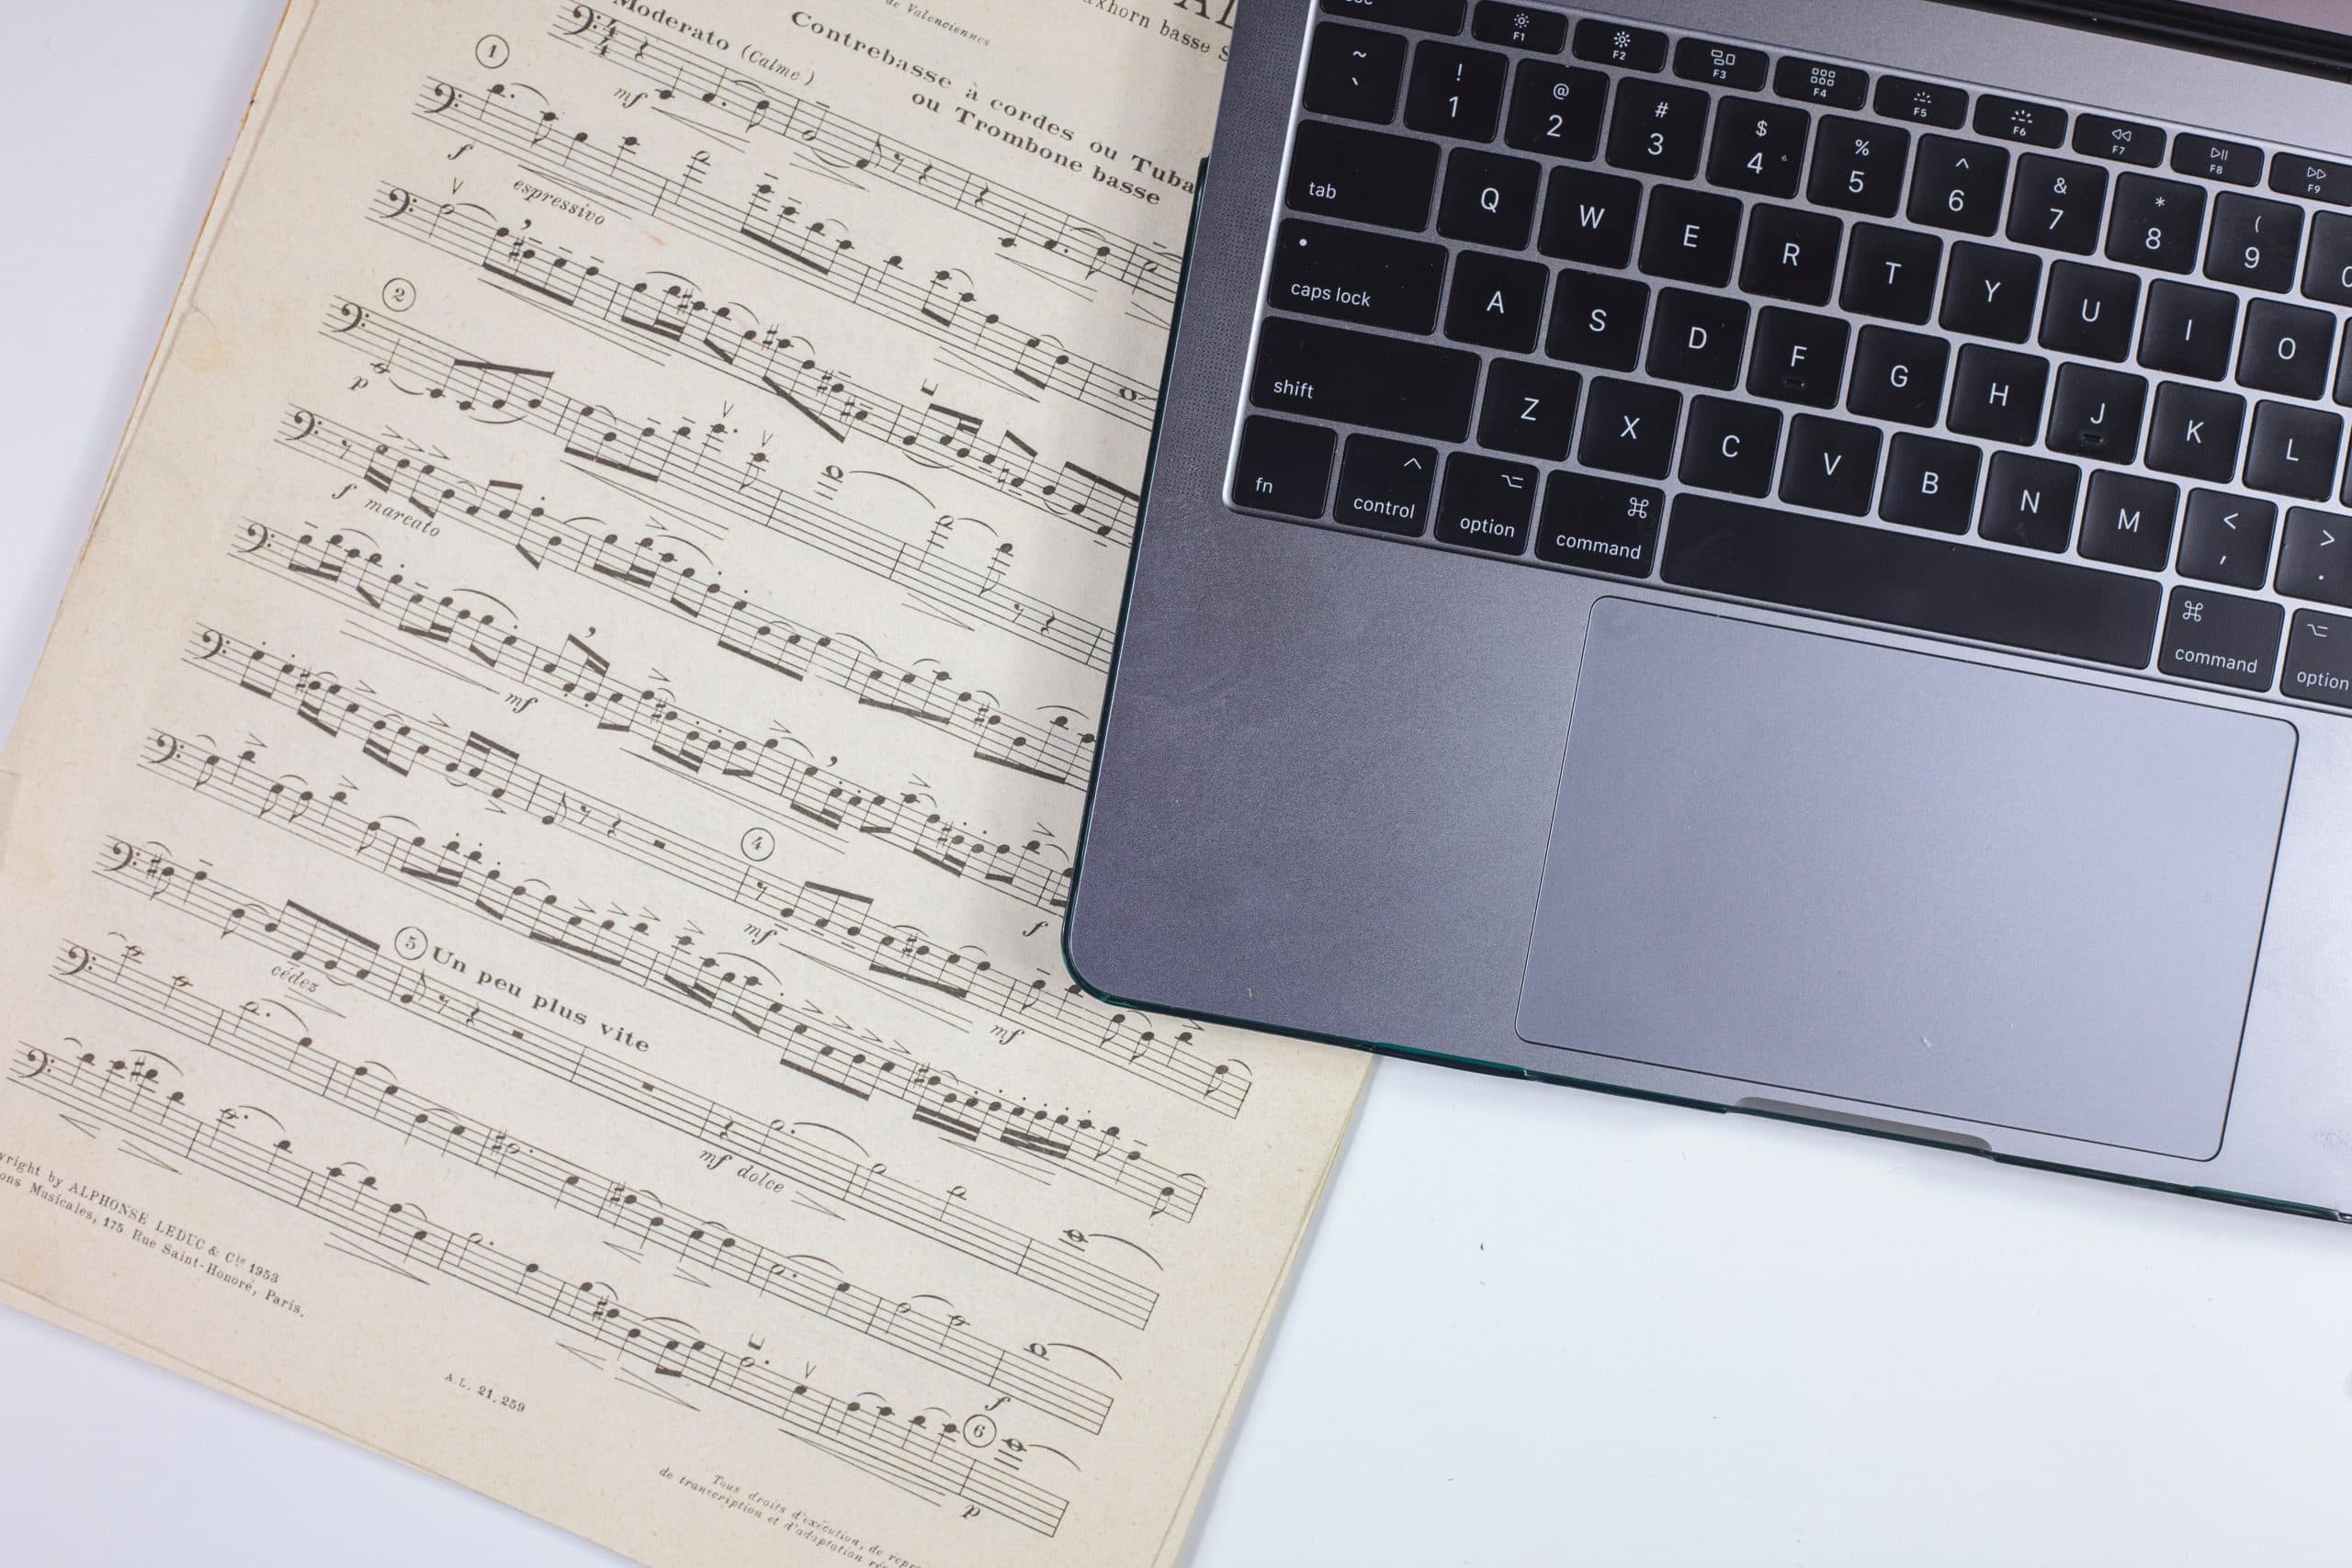 The Best Filmmaking Blogs in 2021 - An image of a musical score next to.a laptop